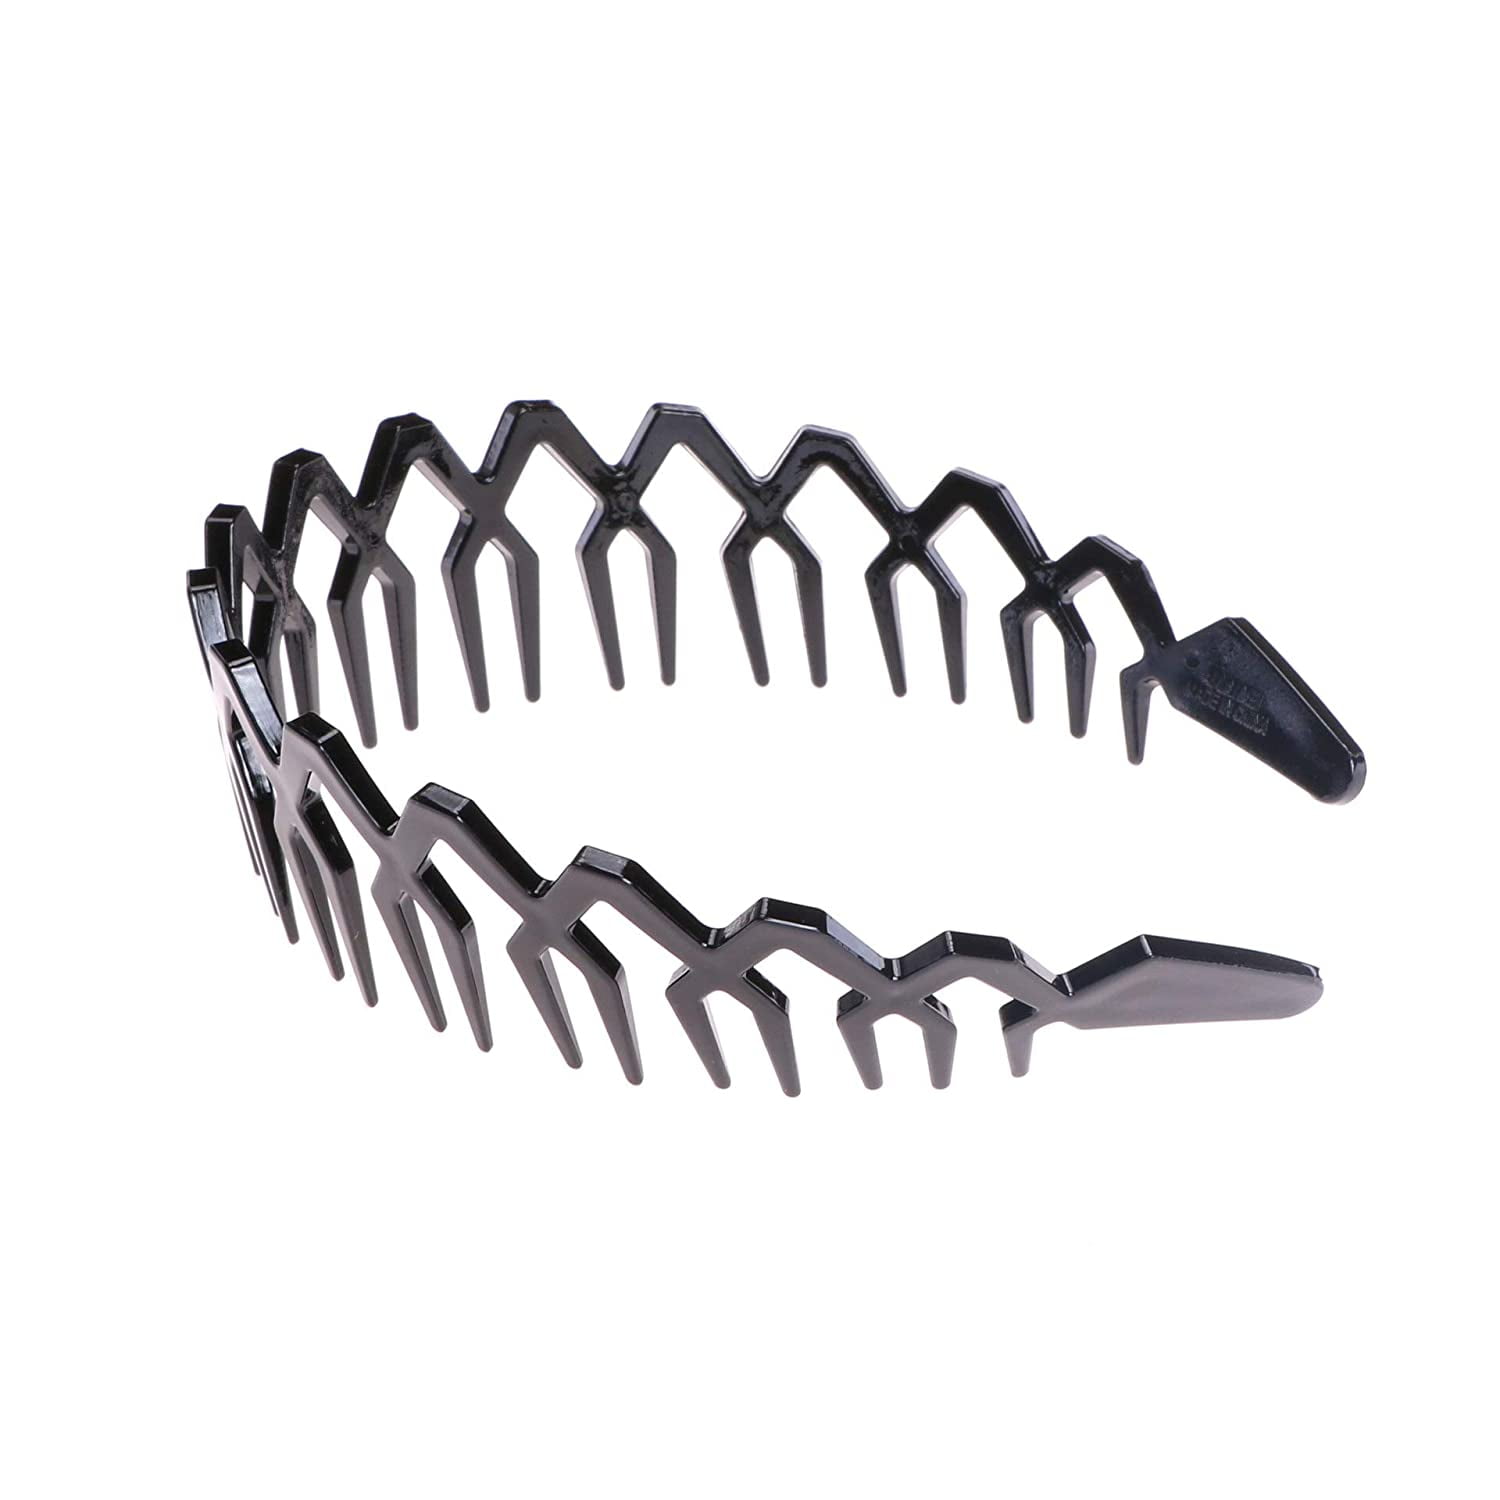  4Pcs Comfortable Shark Tooth Comb Headband Zigzag Hair Band  Toothed Headband Women Men Hair Accessory (A#) : Beauty & Personal Care